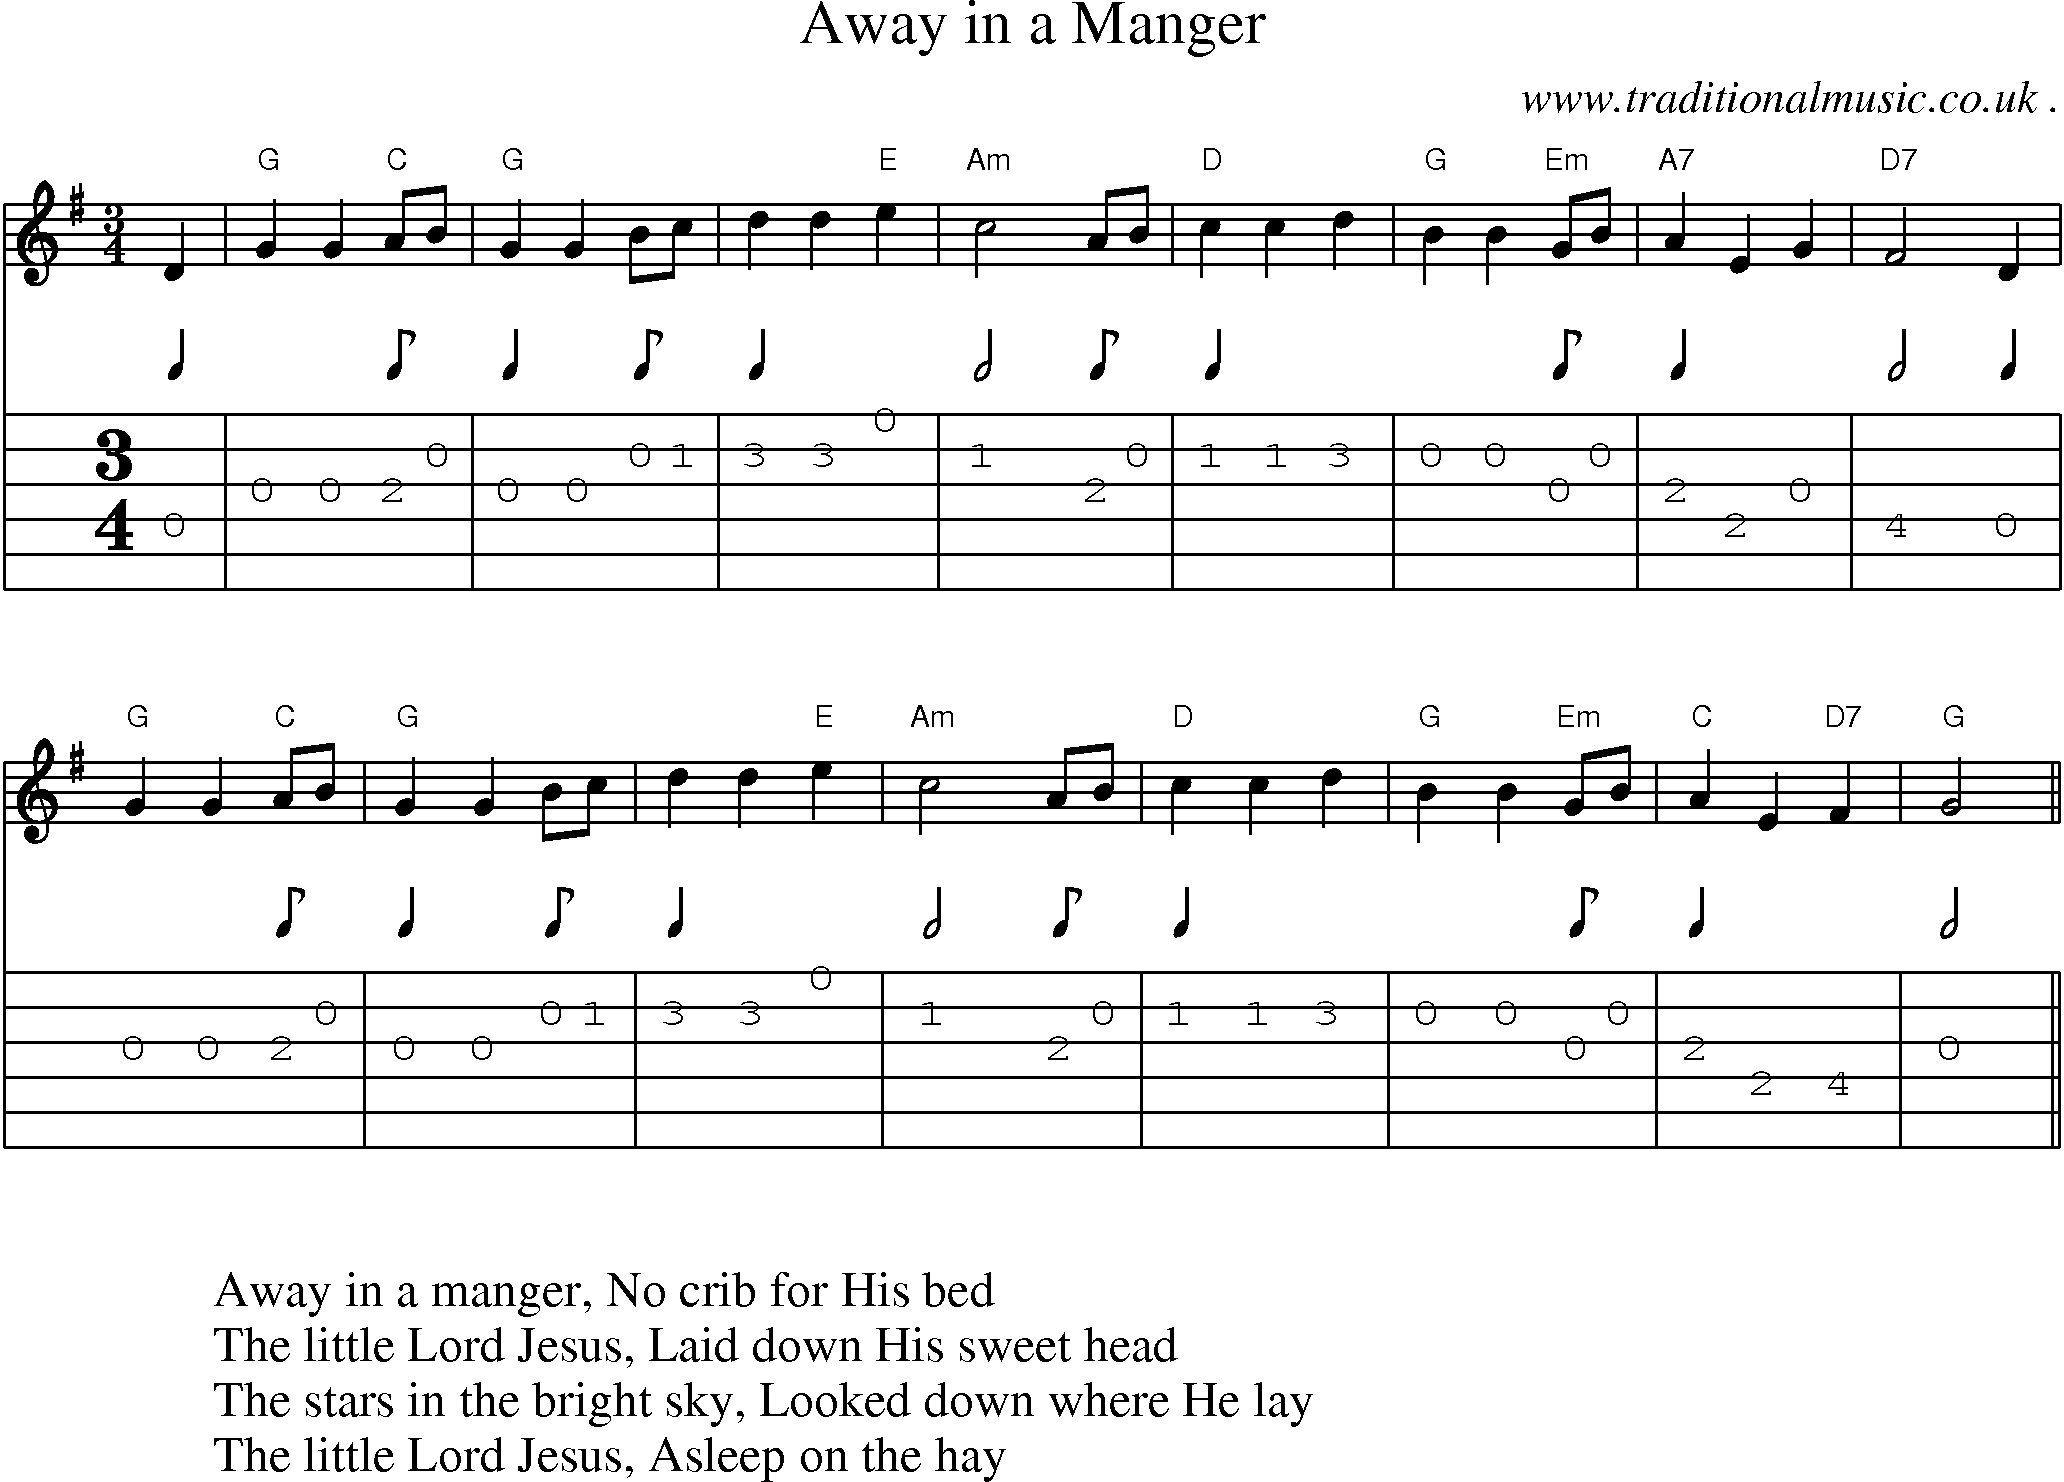 Music Score and Guitar Tabs for Away in a Manger